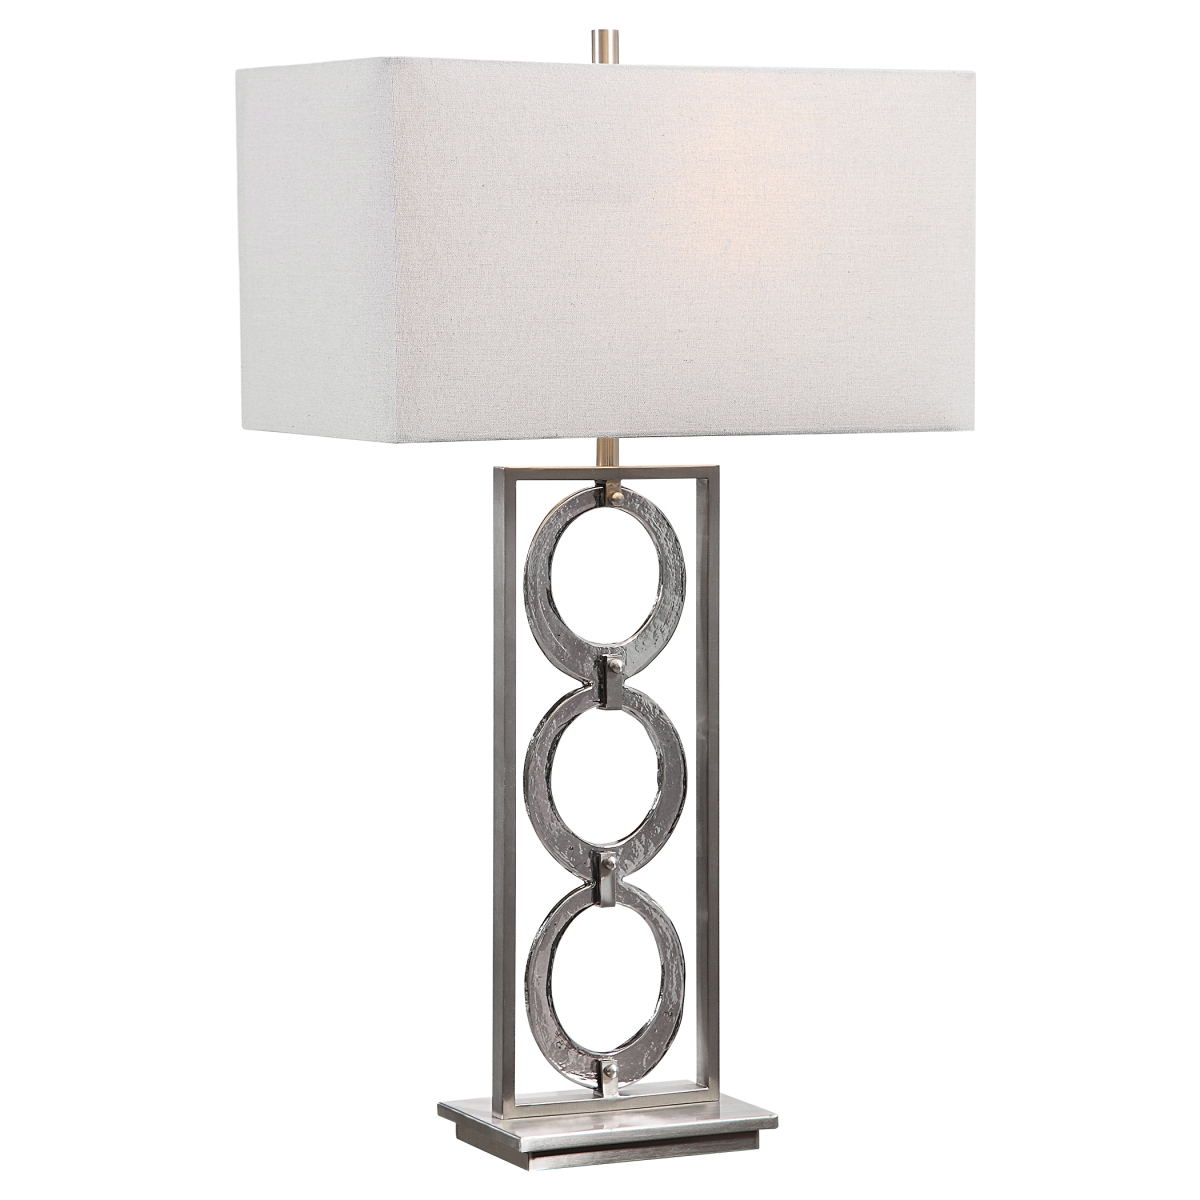 Picture of 212 Main 26364-1 Perrin Nickel Table Lamp